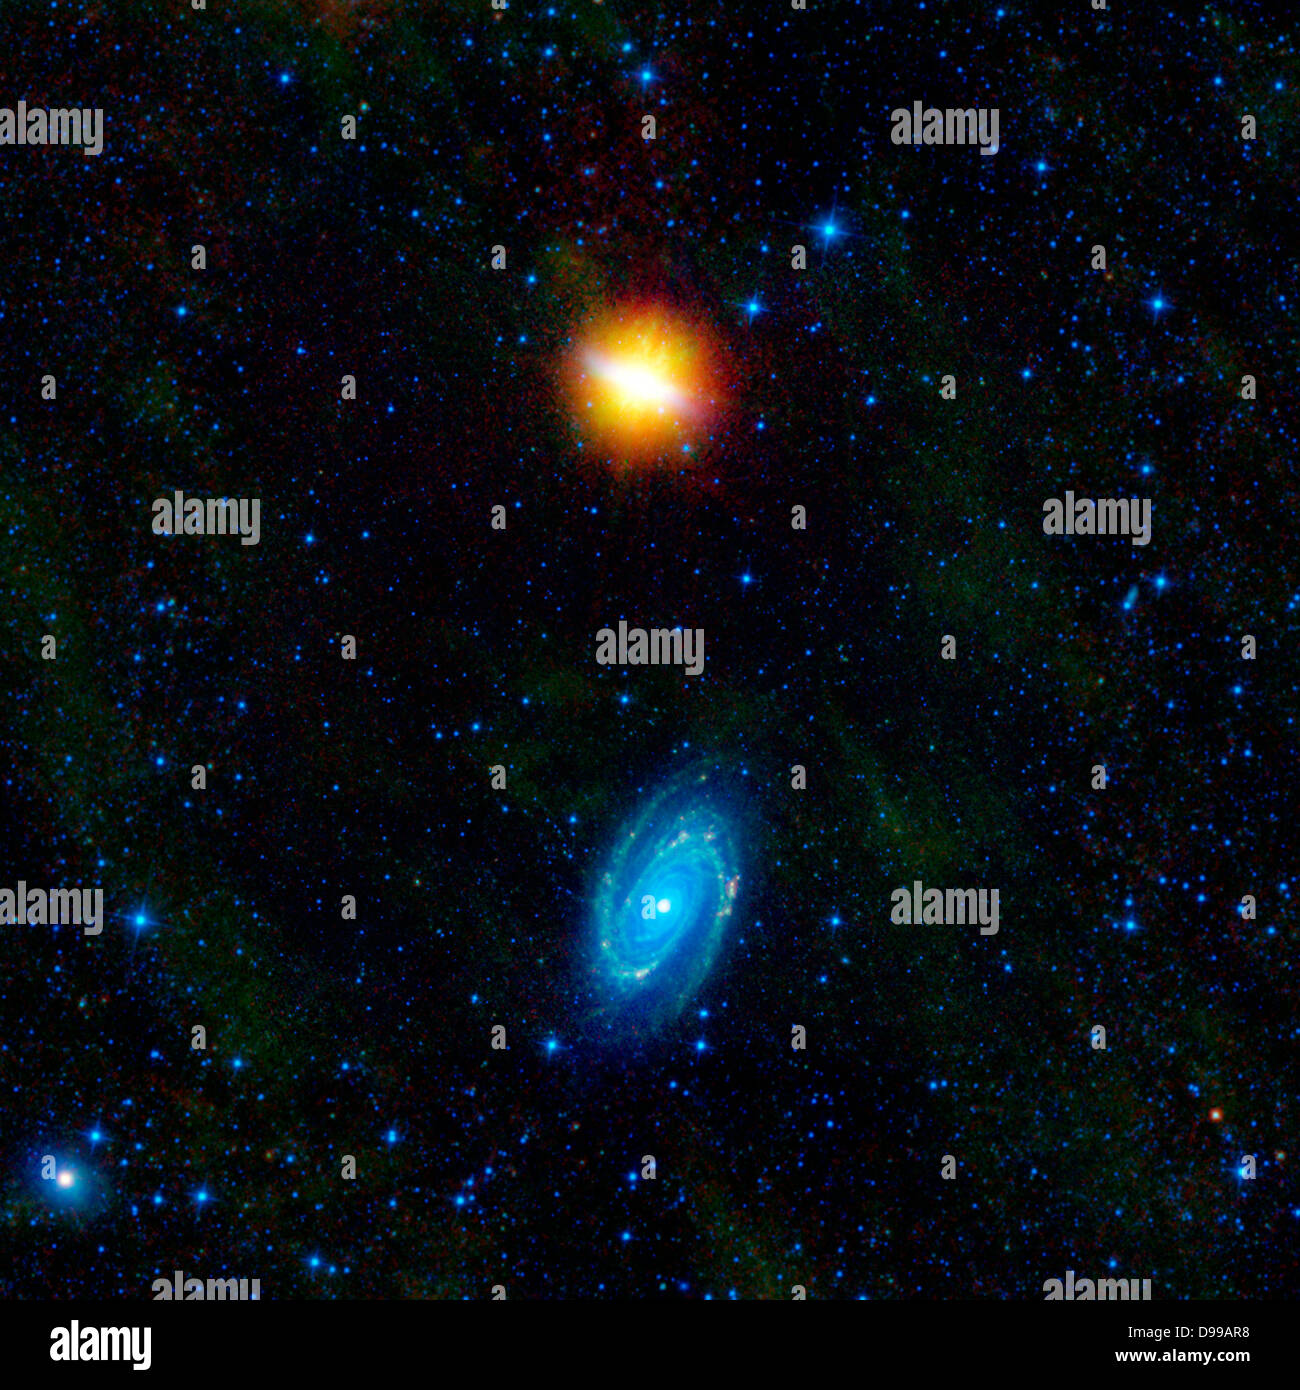 This image from NASA's WISE, features two stunning galaxies engaged in an intergalactic dance. The galaxies, Messier 81 and Messier 82, swept by each other a few hundred million years ago, and will likely continue to twirl around each other multiple times before eventually merging into a single galaxy. Stock Photo